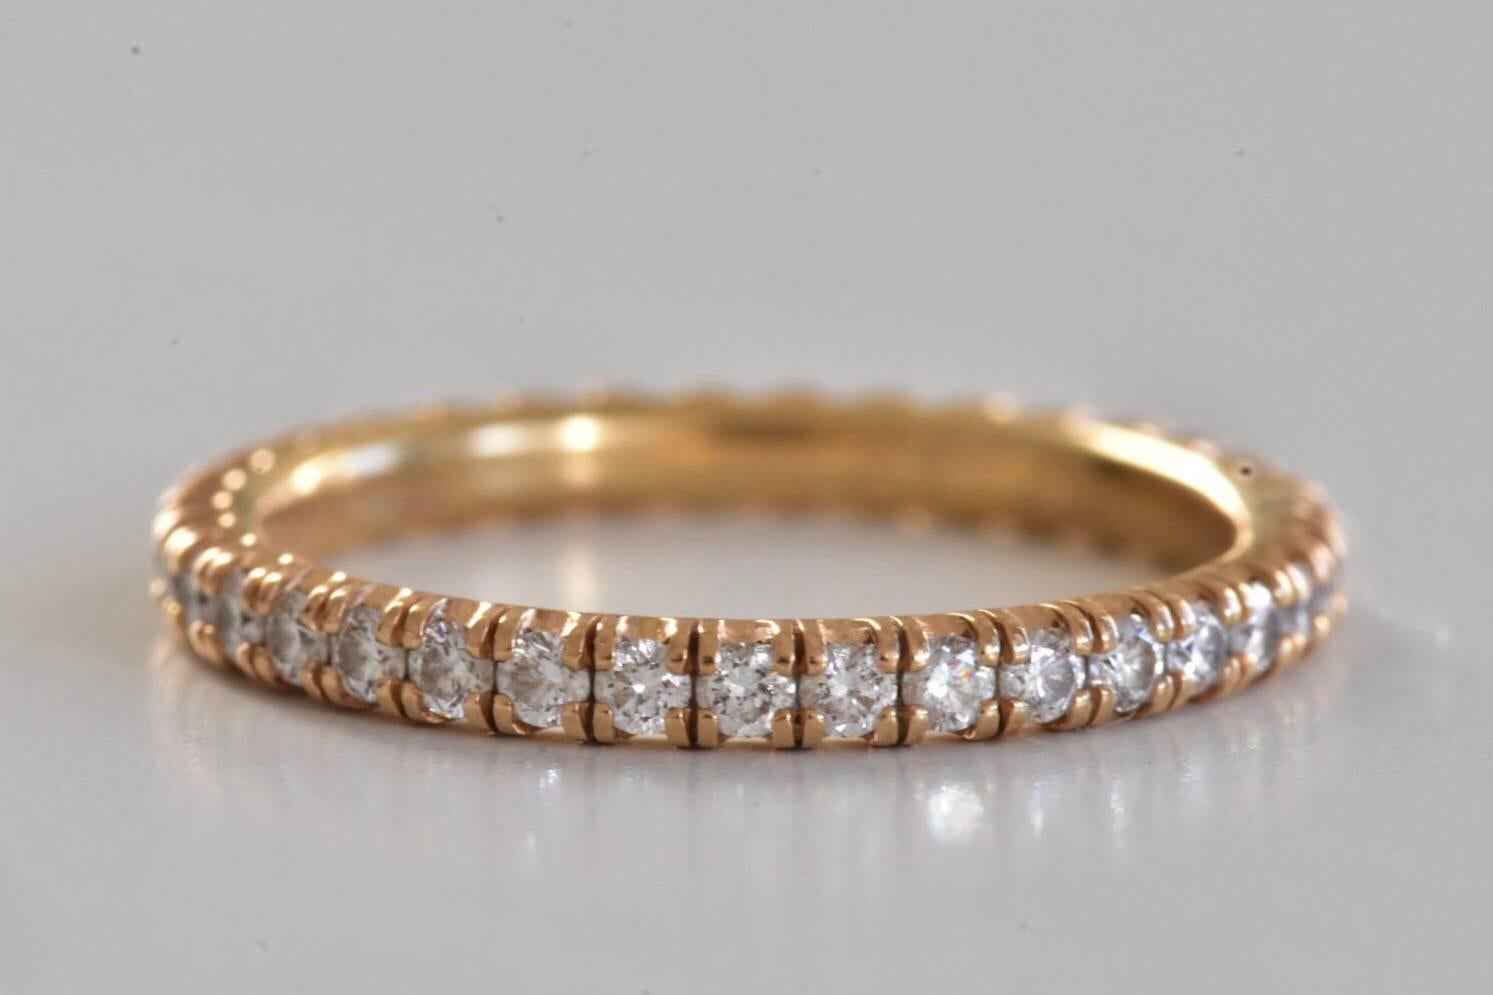 A Cartier Etincelle de Cartier diamond eternity ring set in 18k yellow gold. The ring comprises of a full eternity of approx 37 brilliant cut diamonds set in a four claw setting.
Current retail price £4,200
Ring Size: UK J 1/4 - US 5 -EU